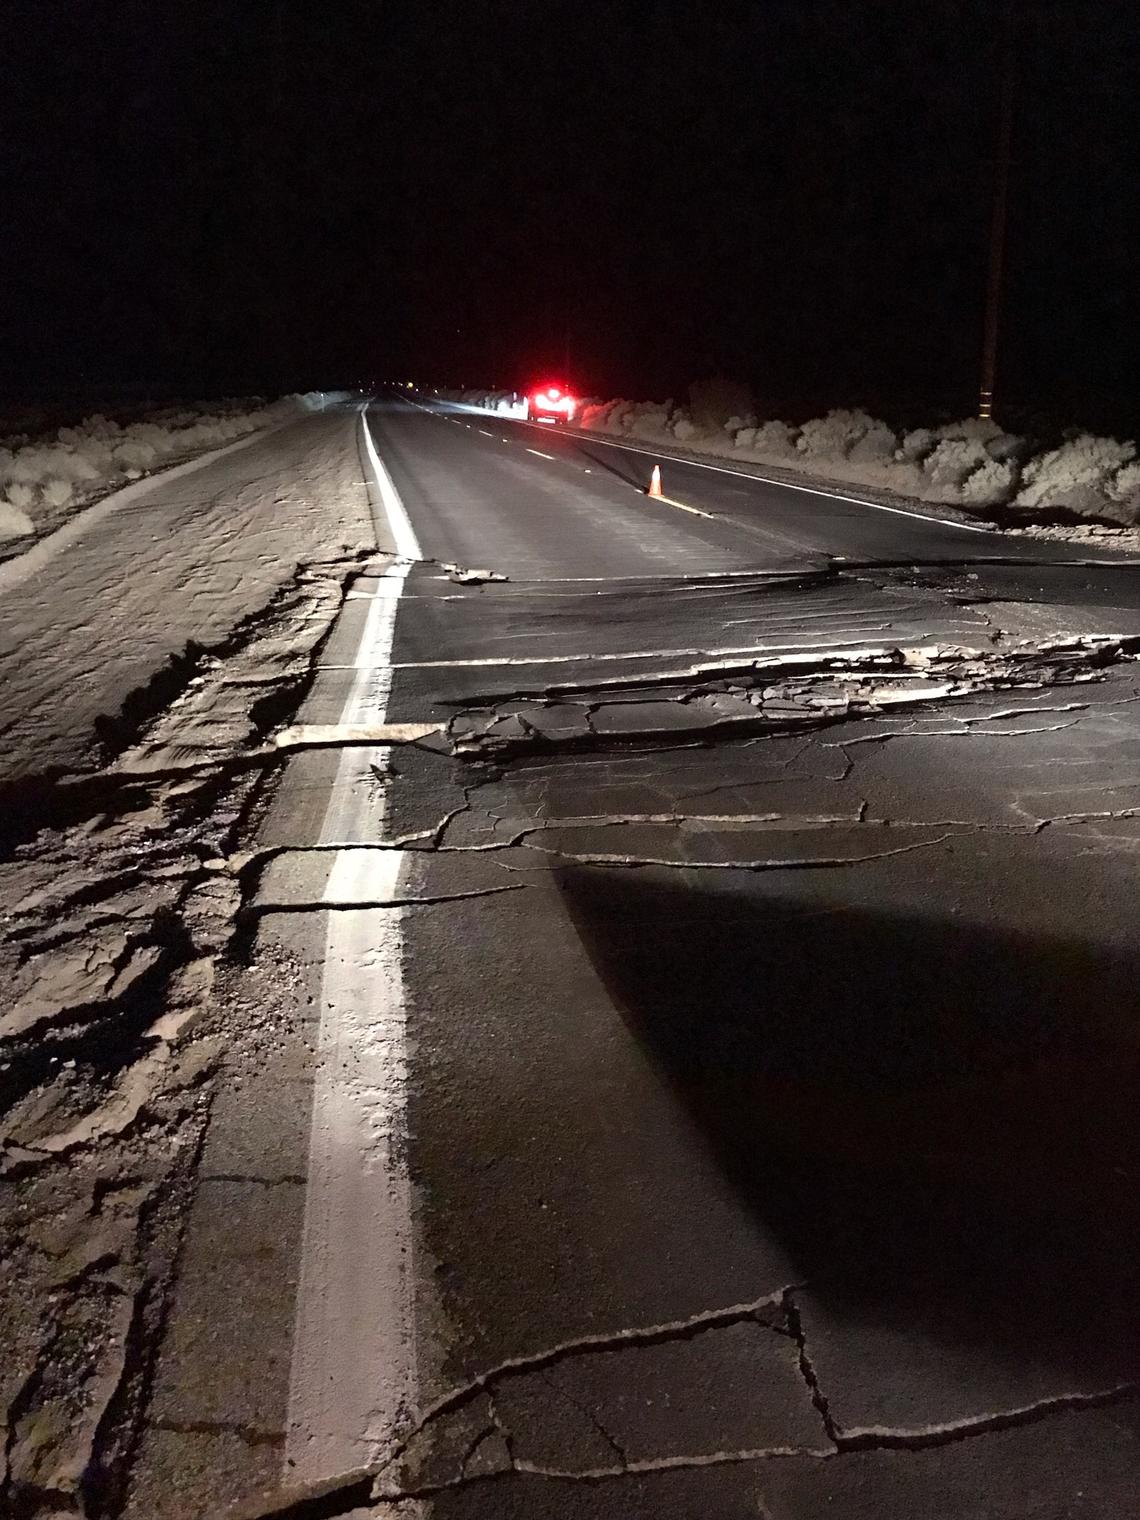 The damaged California State Route 178 SW of Trona, after the M7.1 earthquake on 3 July 2019 (Source: Public domain/USGS)